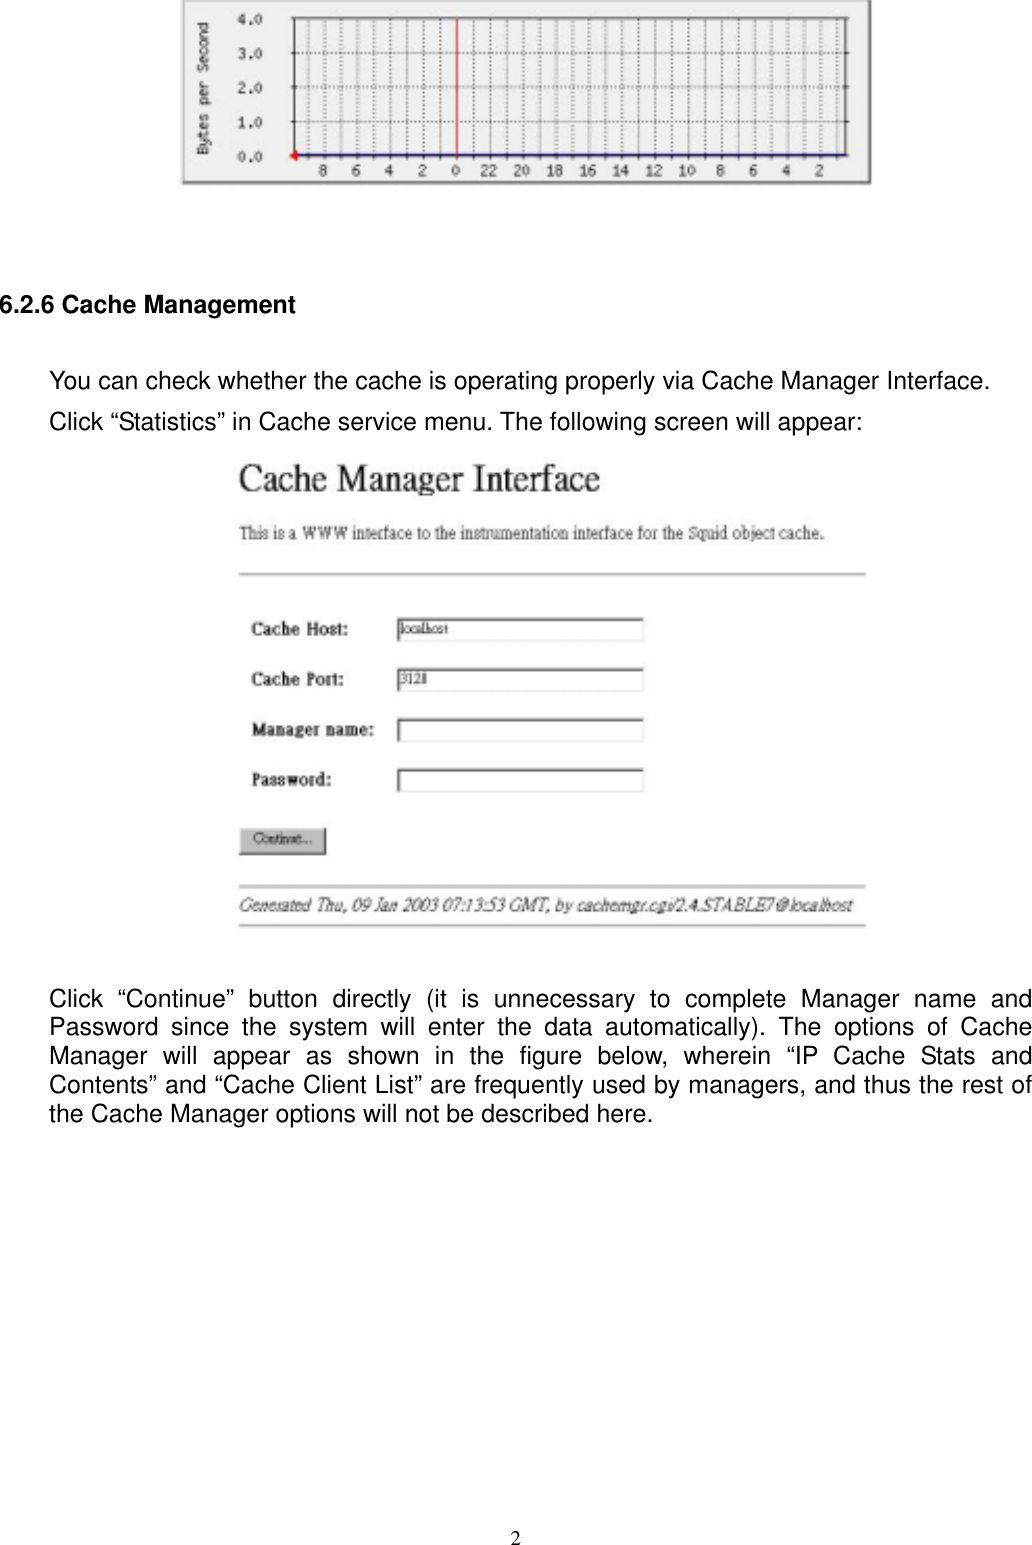  2  6.2.6 Cache Management You can check whether the cache is operating properly via Cache Manager Interface. Click “Statistics” in Cache service menu. The following screen will appear:   Click “Continue” button directly (it is unnecessary to complete Manager name and Password since the system will enter the data automatically). The options of Cache Manager will appear as shown in the figure below, wherein “IP Cache Stats and Contents” and “Cache Client List” are frequently used by managers, and thus the rest of the Cache Manager options will not be described here.  